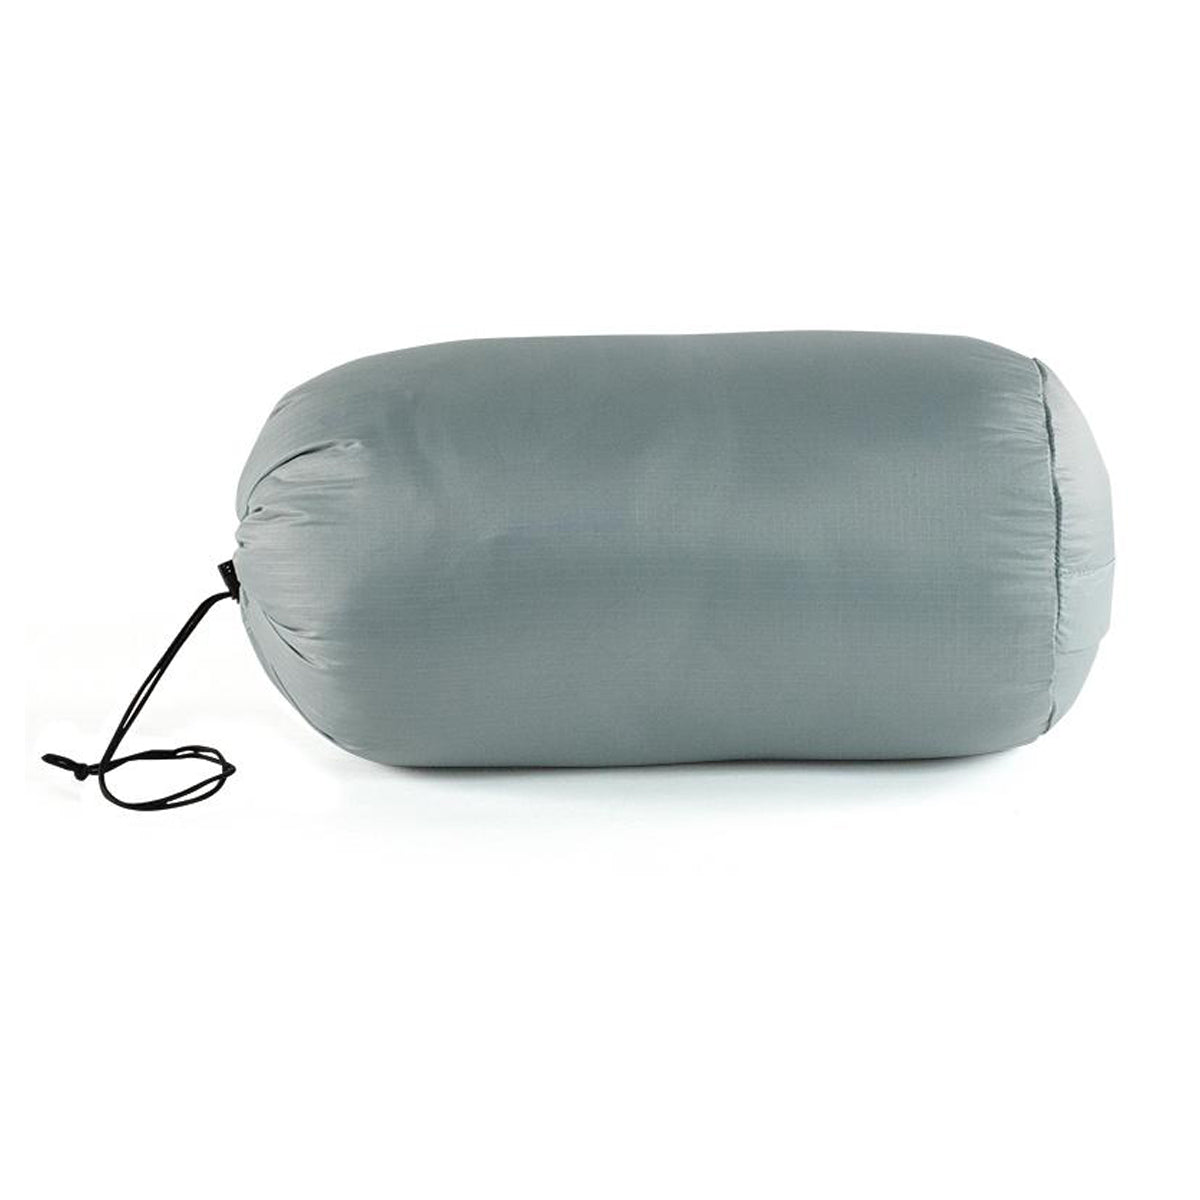 Stone Glacier Chilkoot 15° Sleeping Bag in Stone Glacier Chilkoot 15º Sleeping Bag by Stone Glacier | Camping - goHUNT Shop by GOHUNT | Stone Glacier - GOHUNT Shop